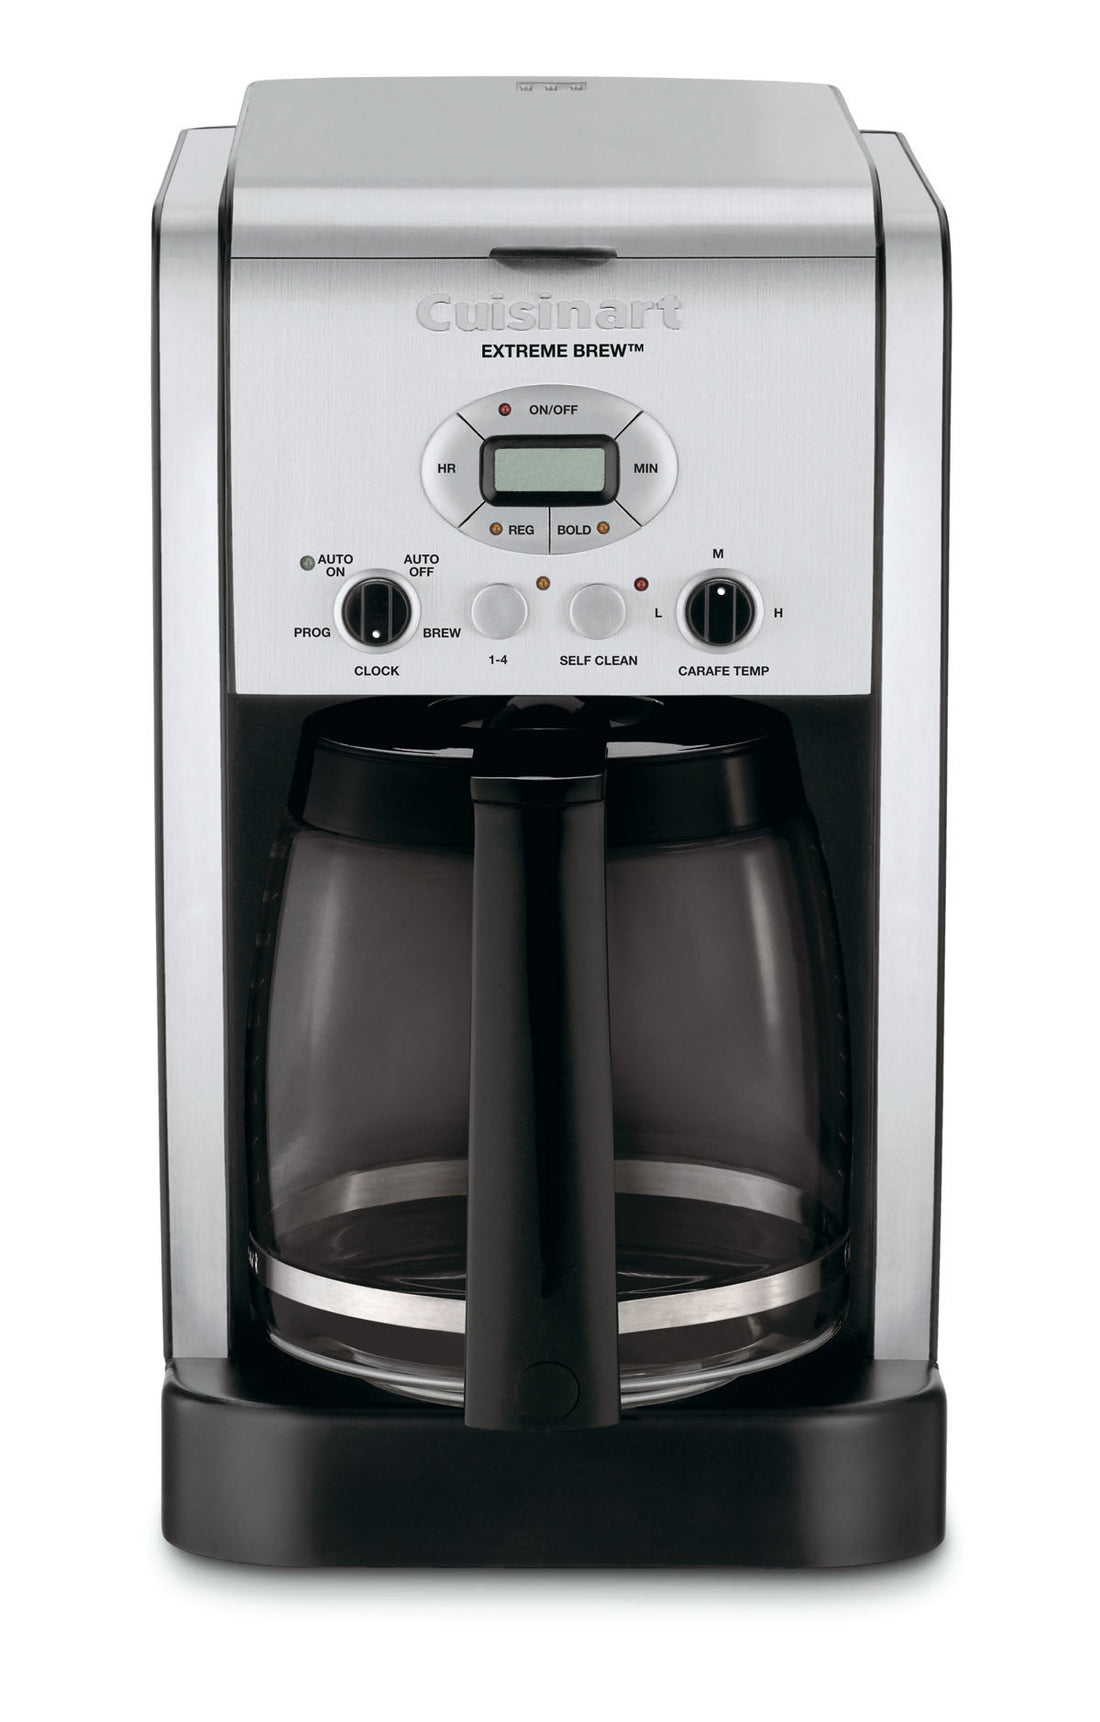 Cuisinart Coffee Center Coffeemaker & Brewer, Programmable, Single Serve, 2-in-1, 12 Cup Capacity